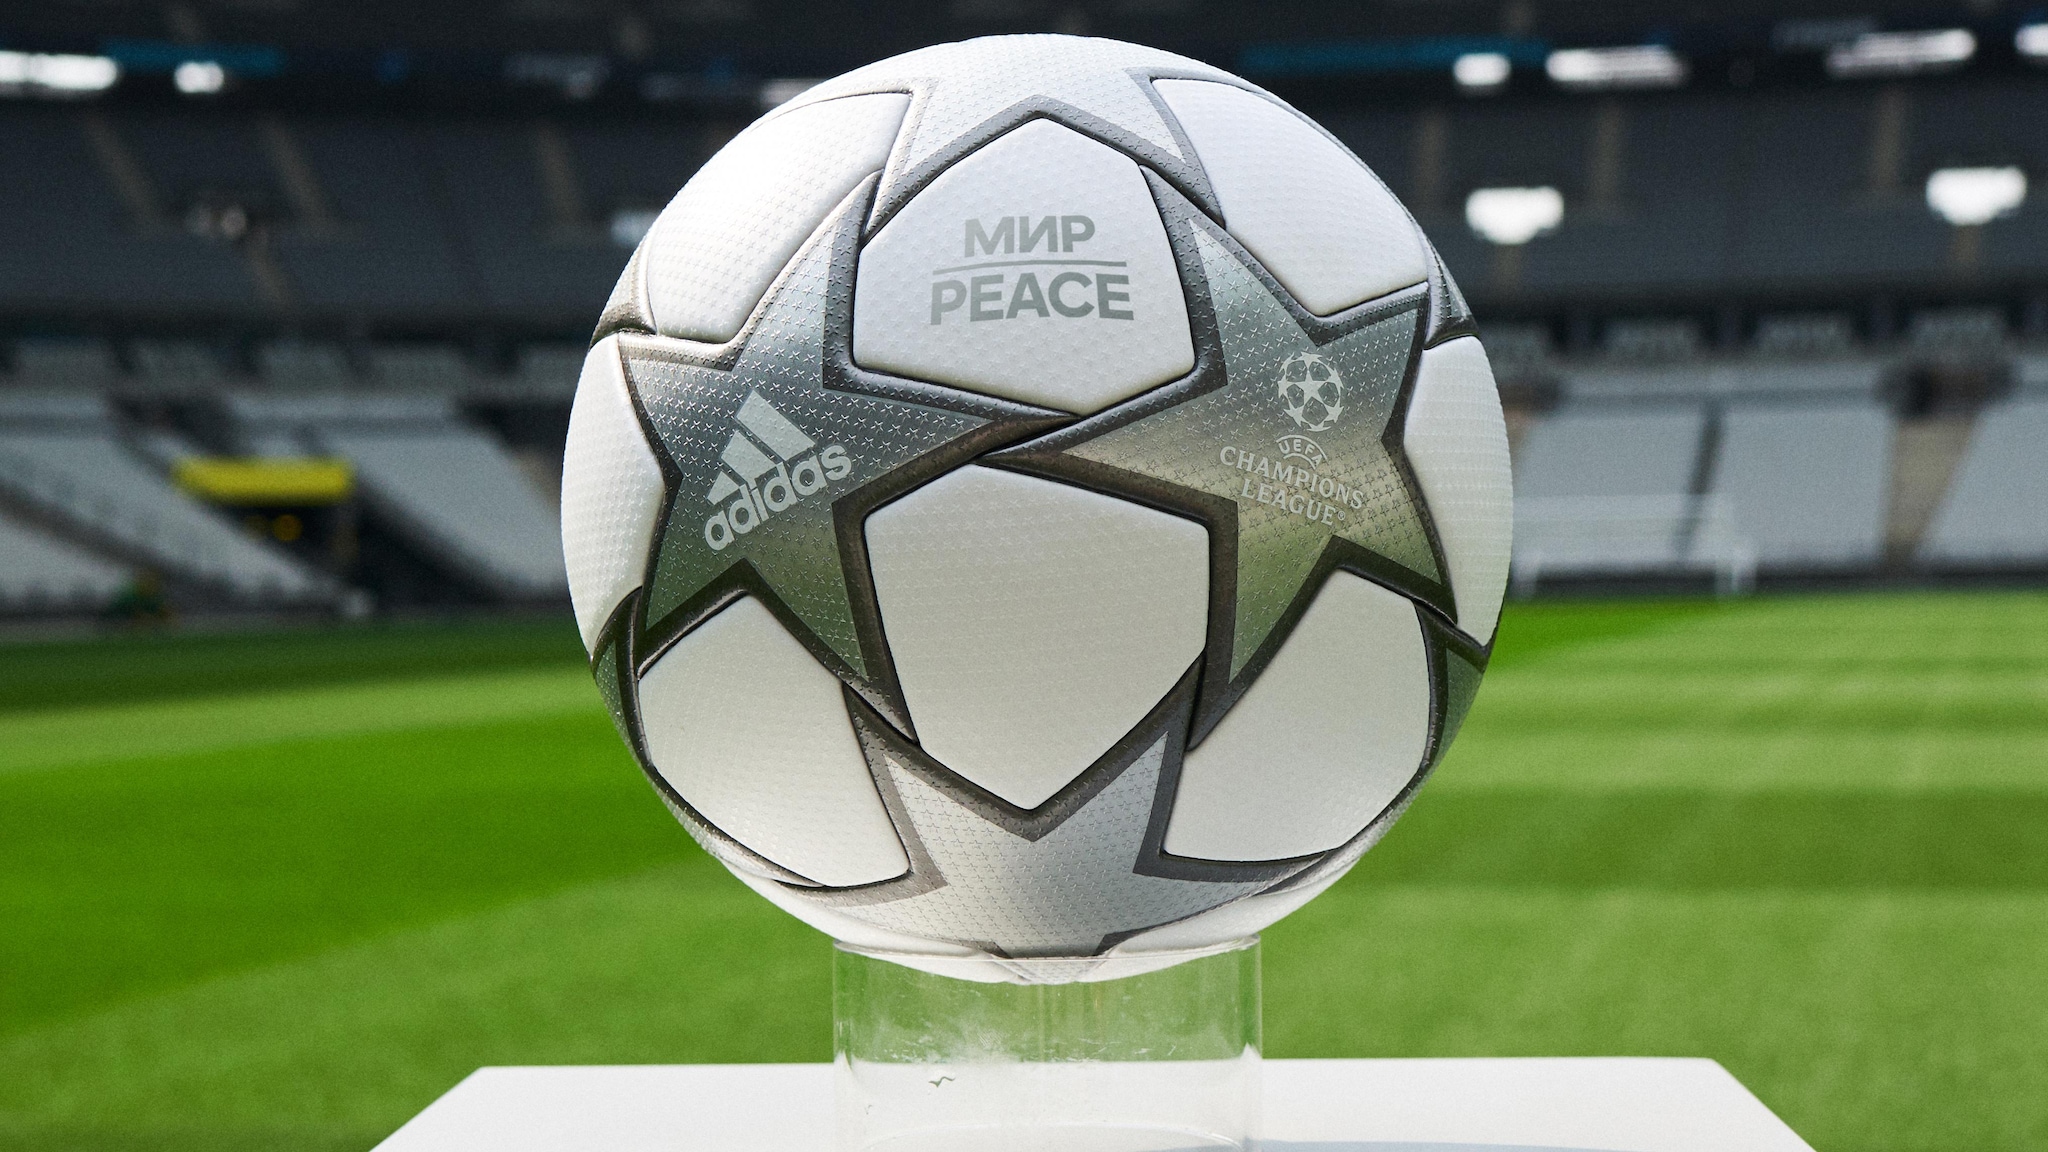 UEFA Champions League final 2022 ball and branding unveiled.